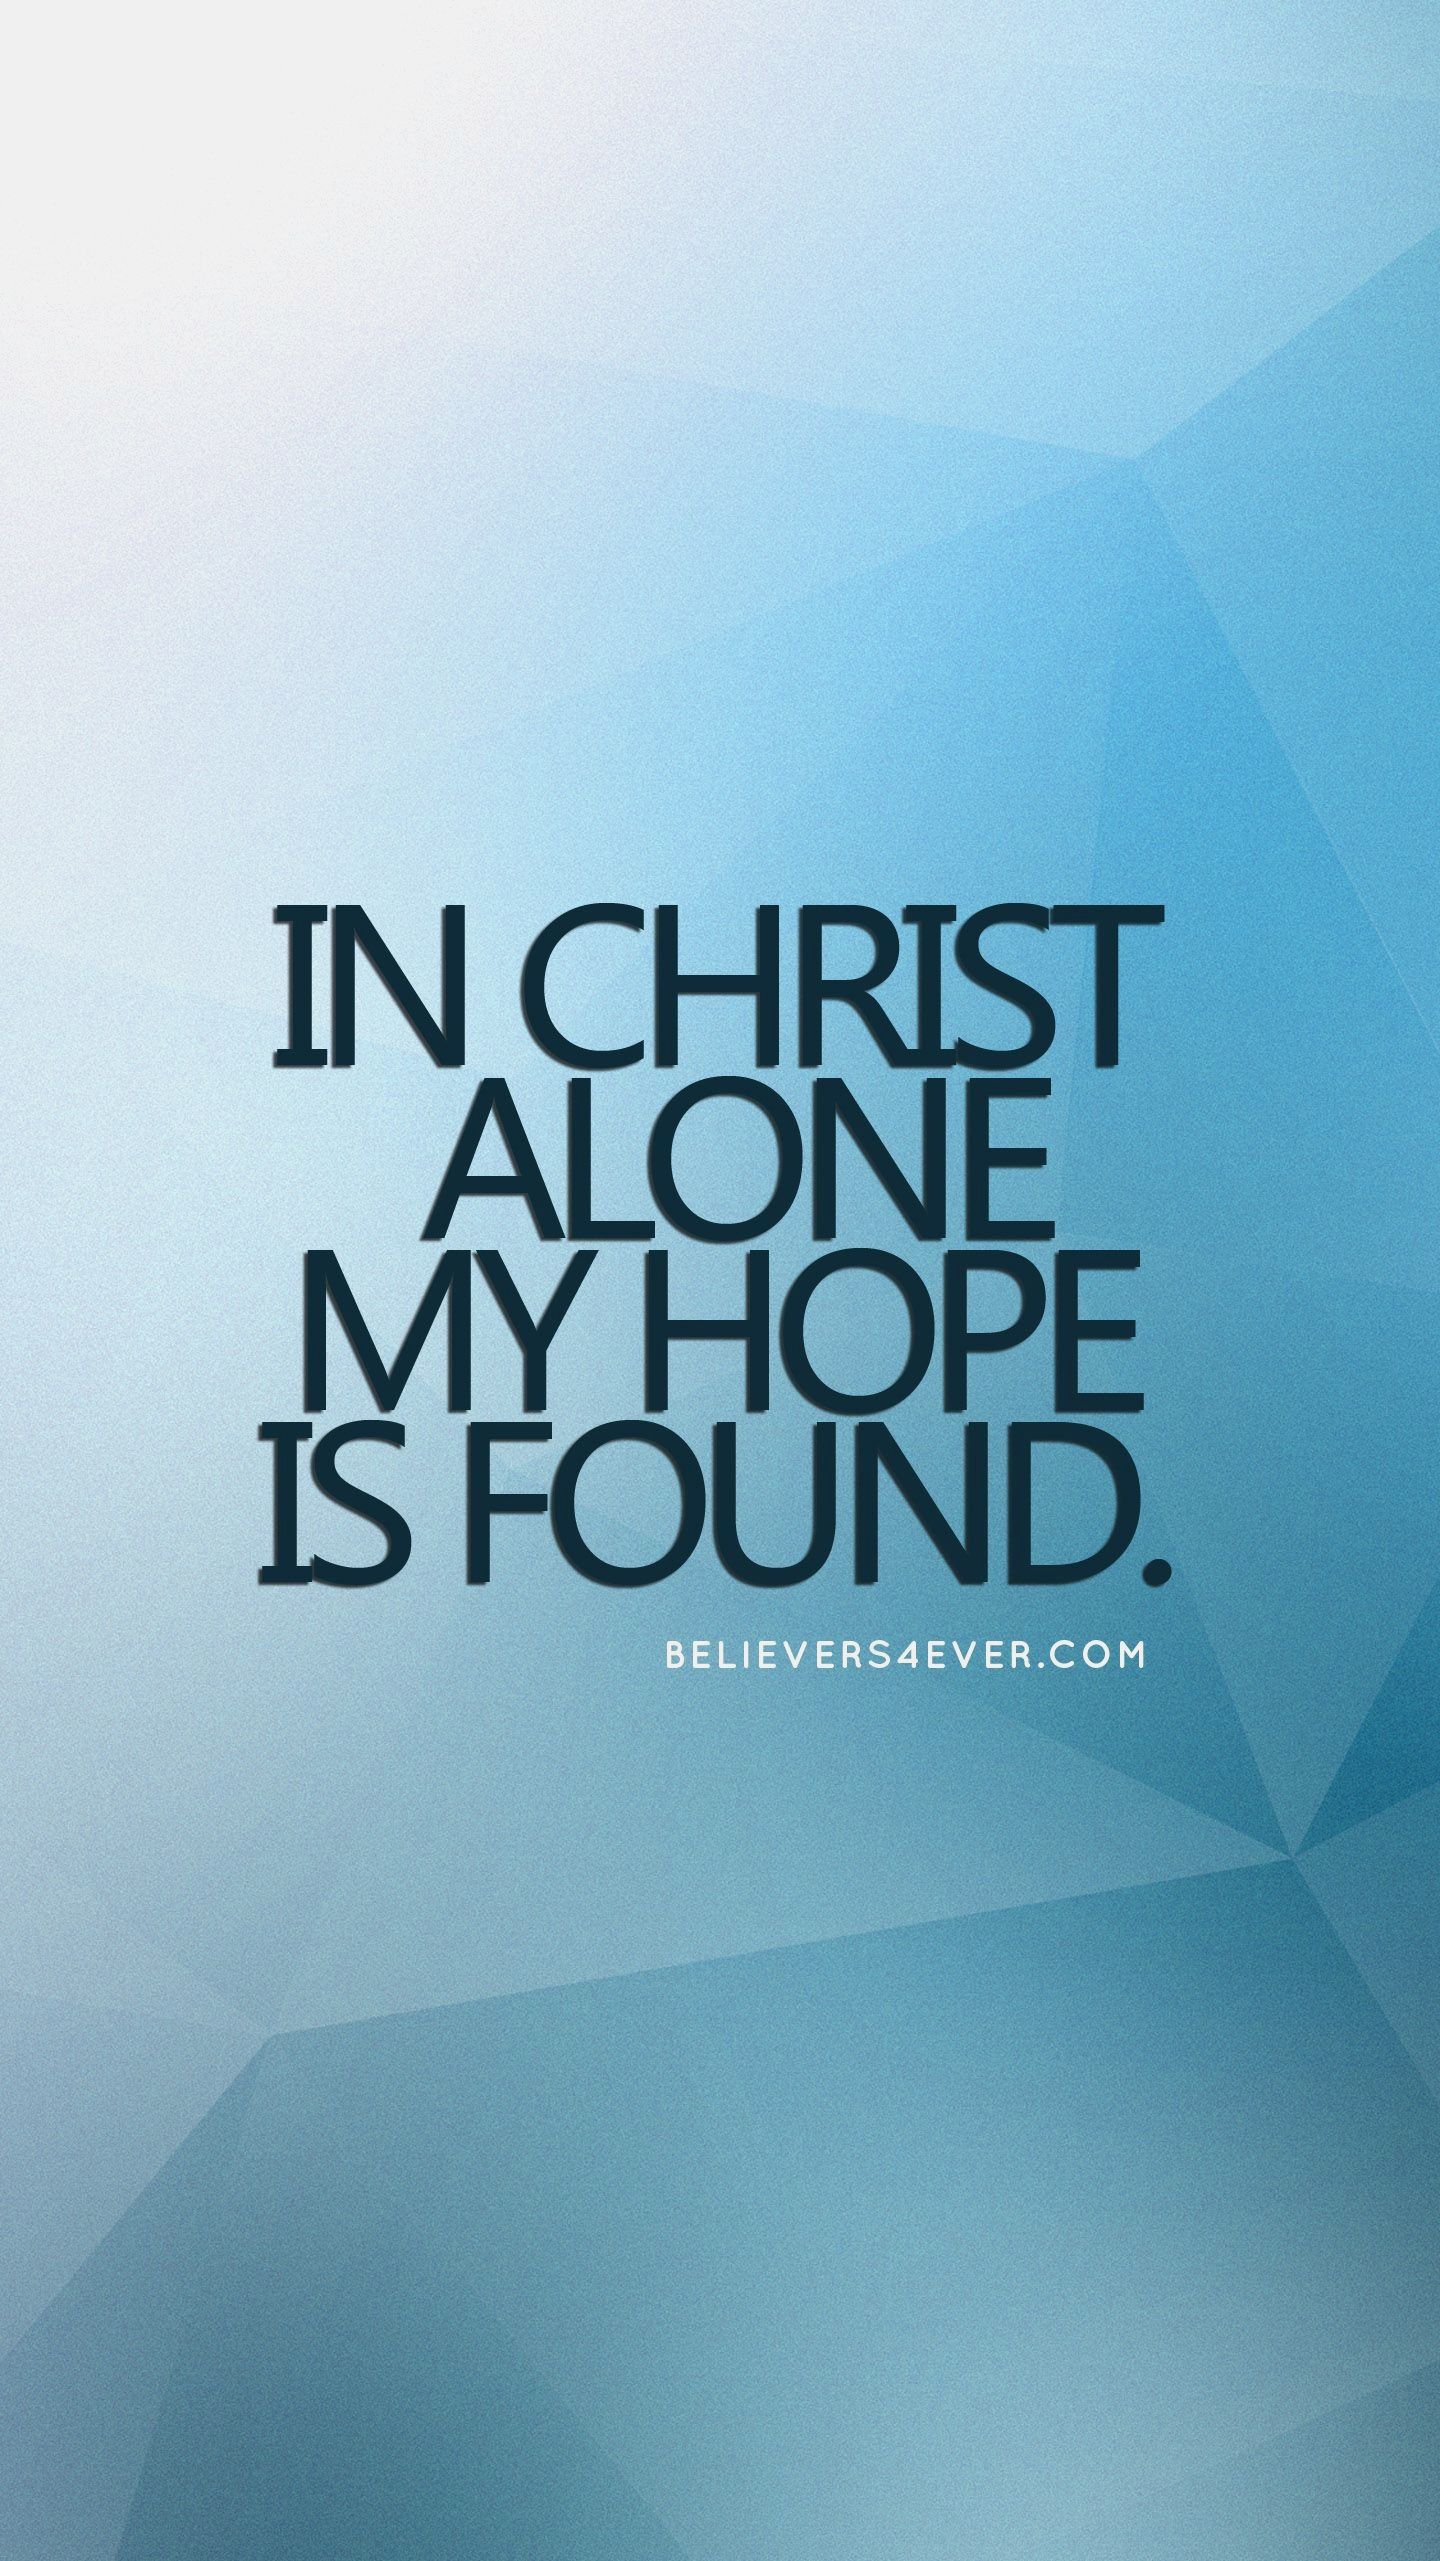 In Christ Alone My Hope Is Found Free Mobile Wallpaper